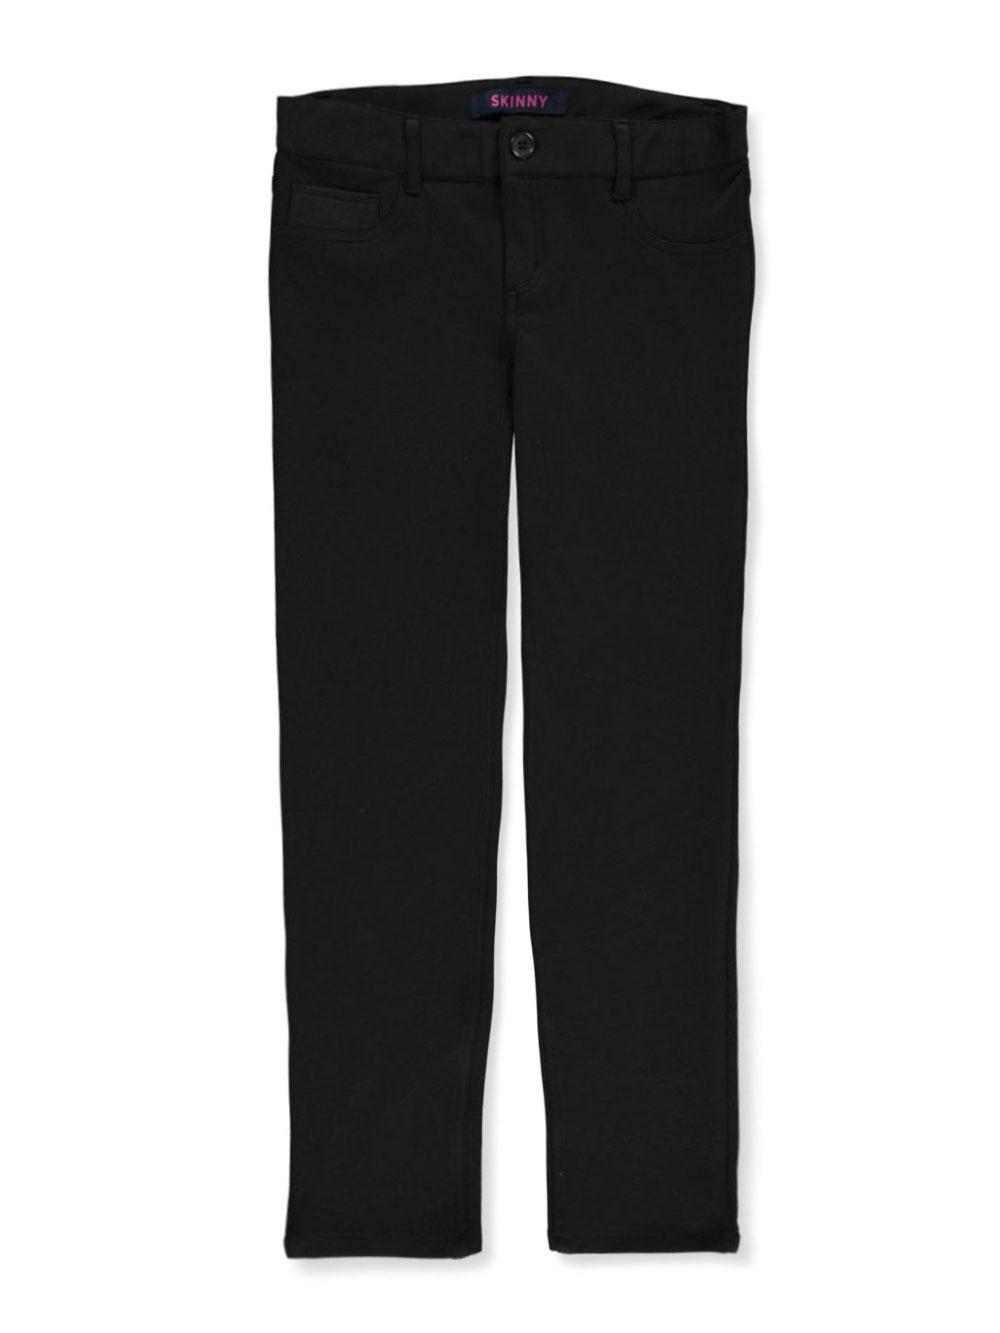 Black and Navy Pants